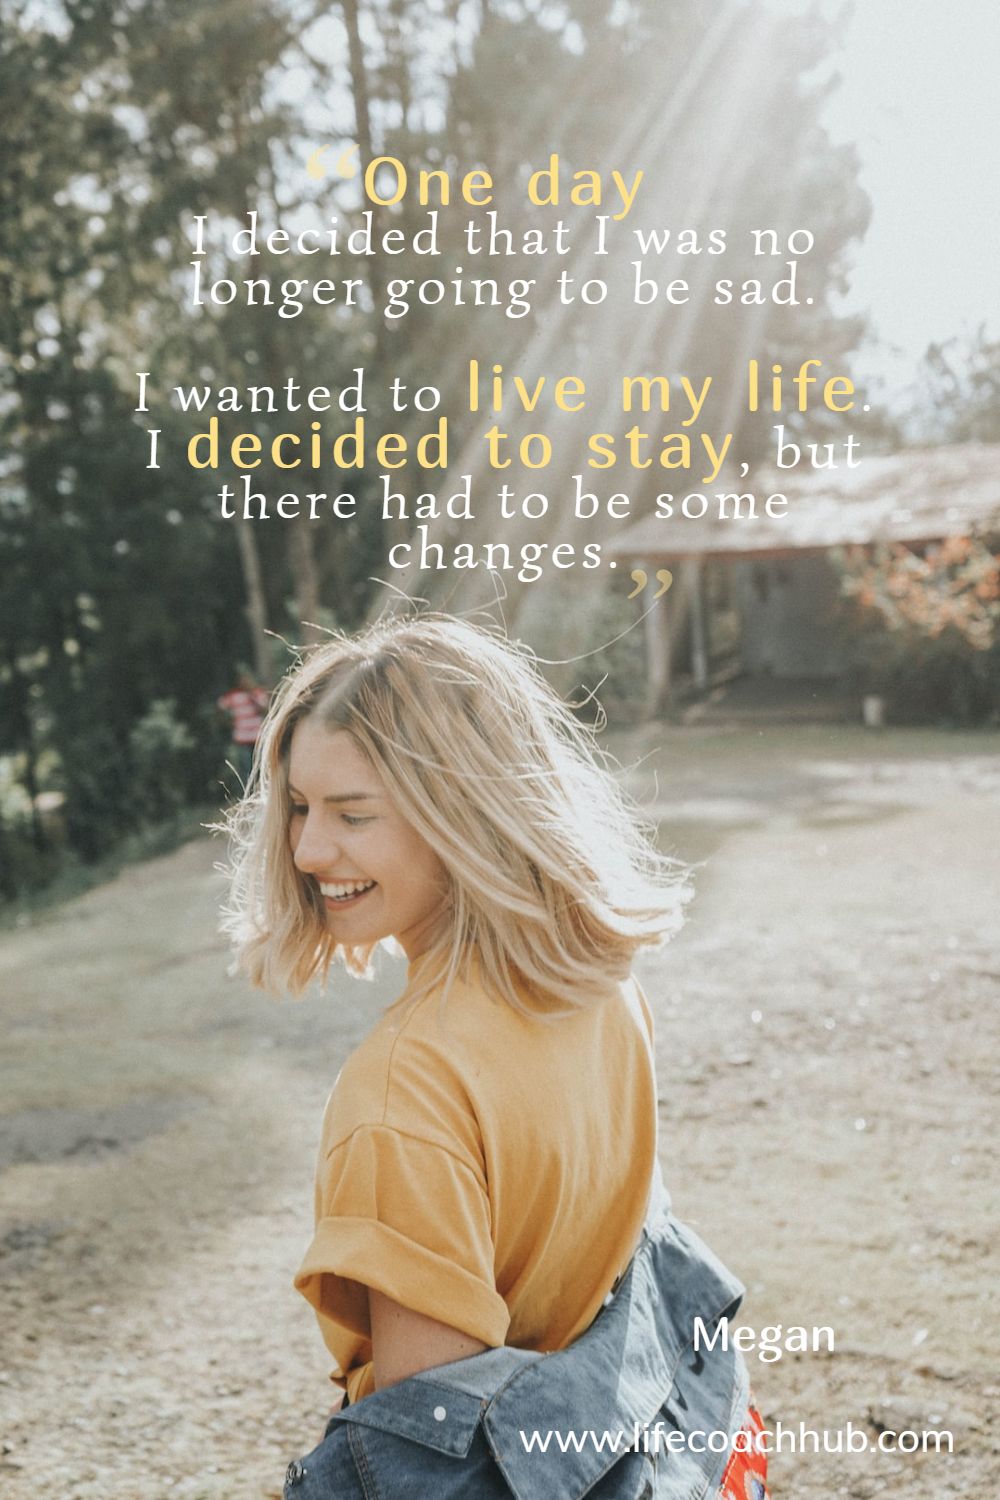 One day I decided that I was no longer going to be sad. I wanted to live my life. I decided to stay, but there had to be some changes.	 Megan Coaching Quote